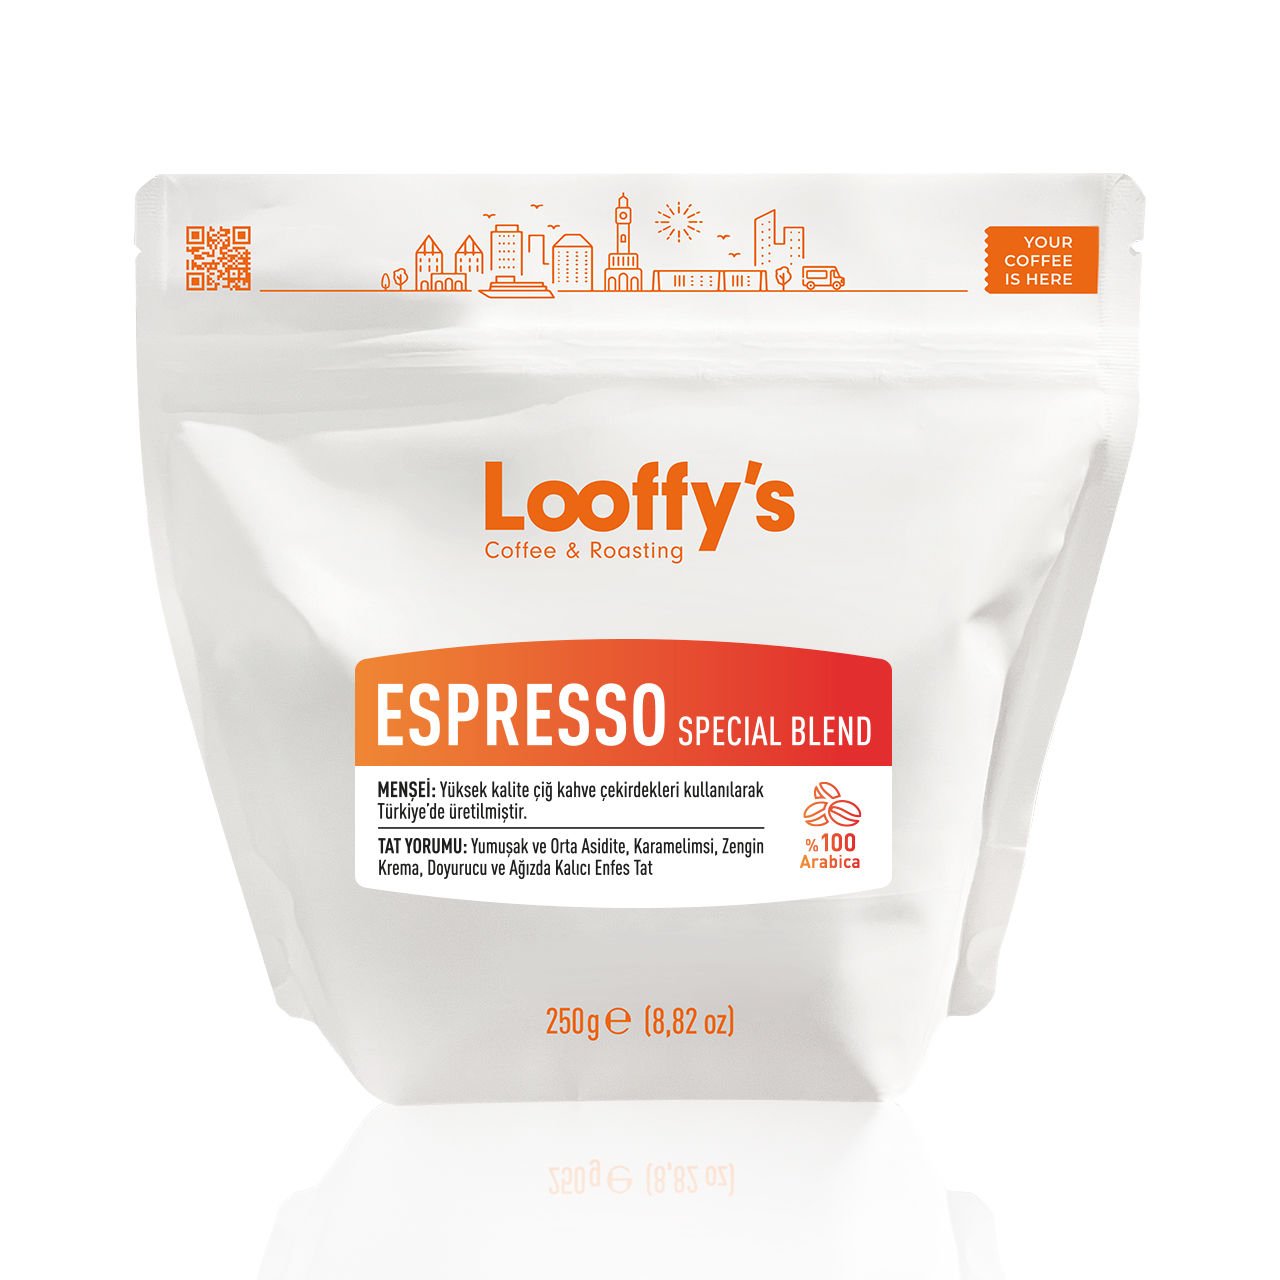 Looffy's Espresso Special Blend